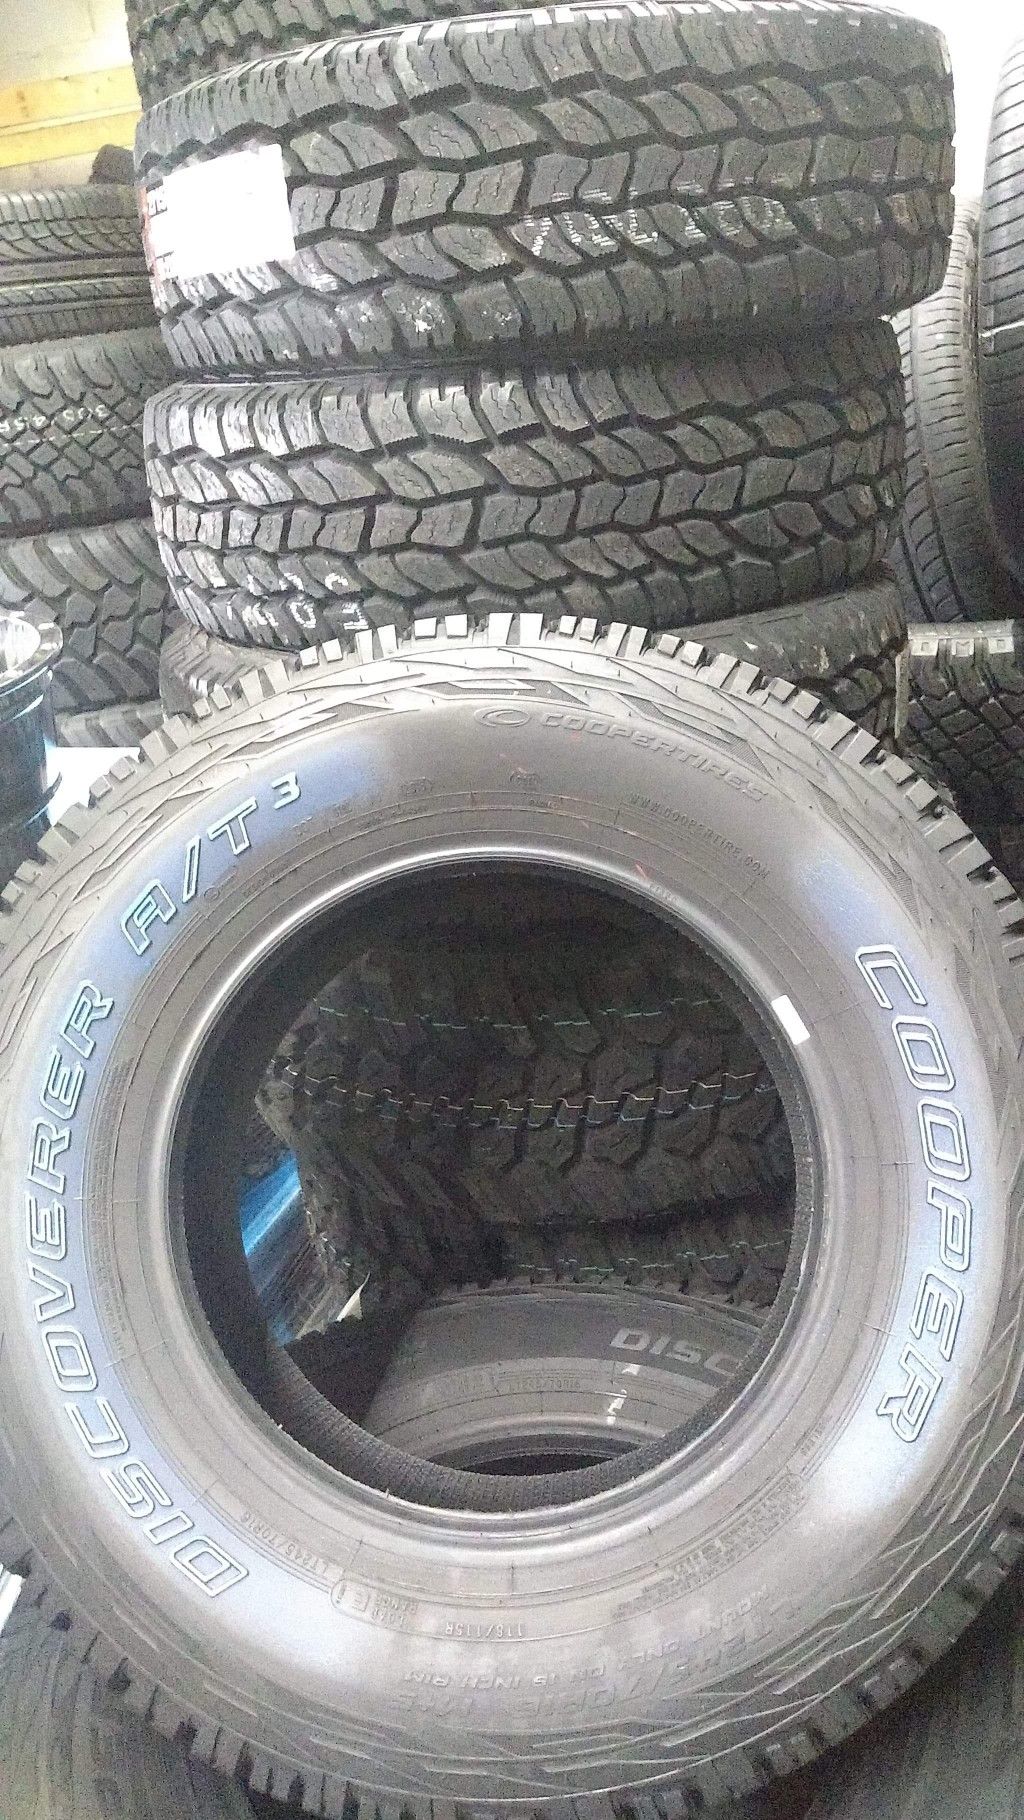 New 245-70-16 cooper A/T 3 tires. $0 down to ride today! Ulohos 2940 N Keystone Mon-Sat 10-6pm